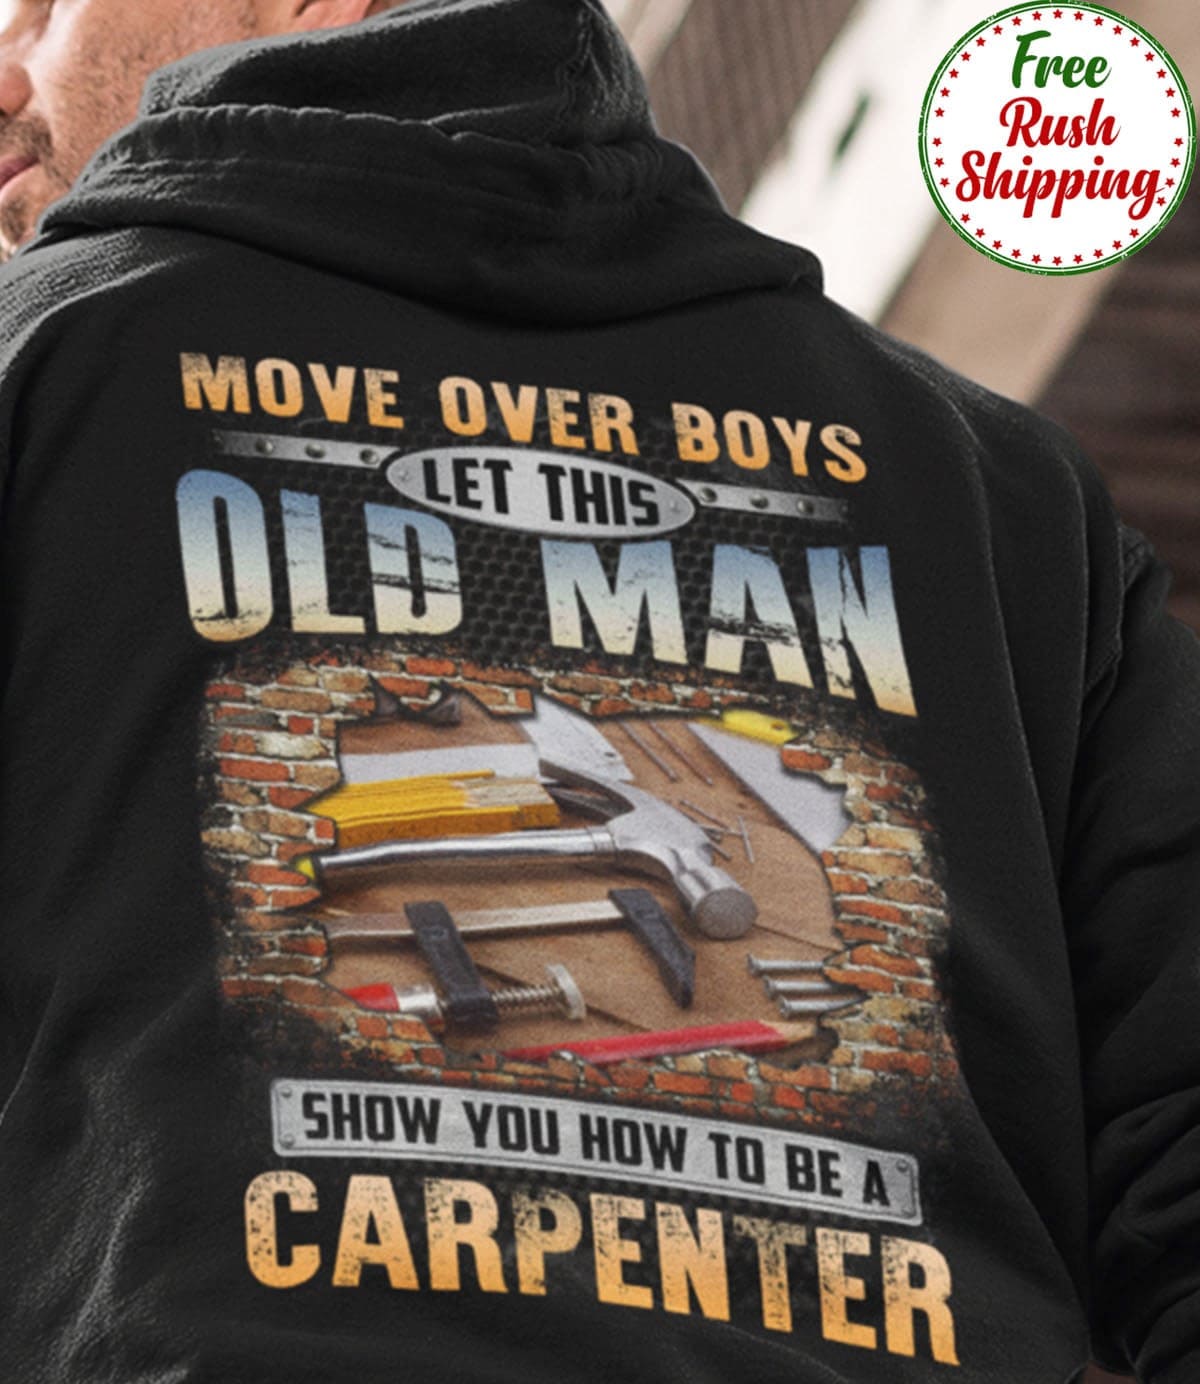 Move over boys let this old man show you how to be a carpenter - Gift for carpenter, carpenter's tool graphic T-shirt